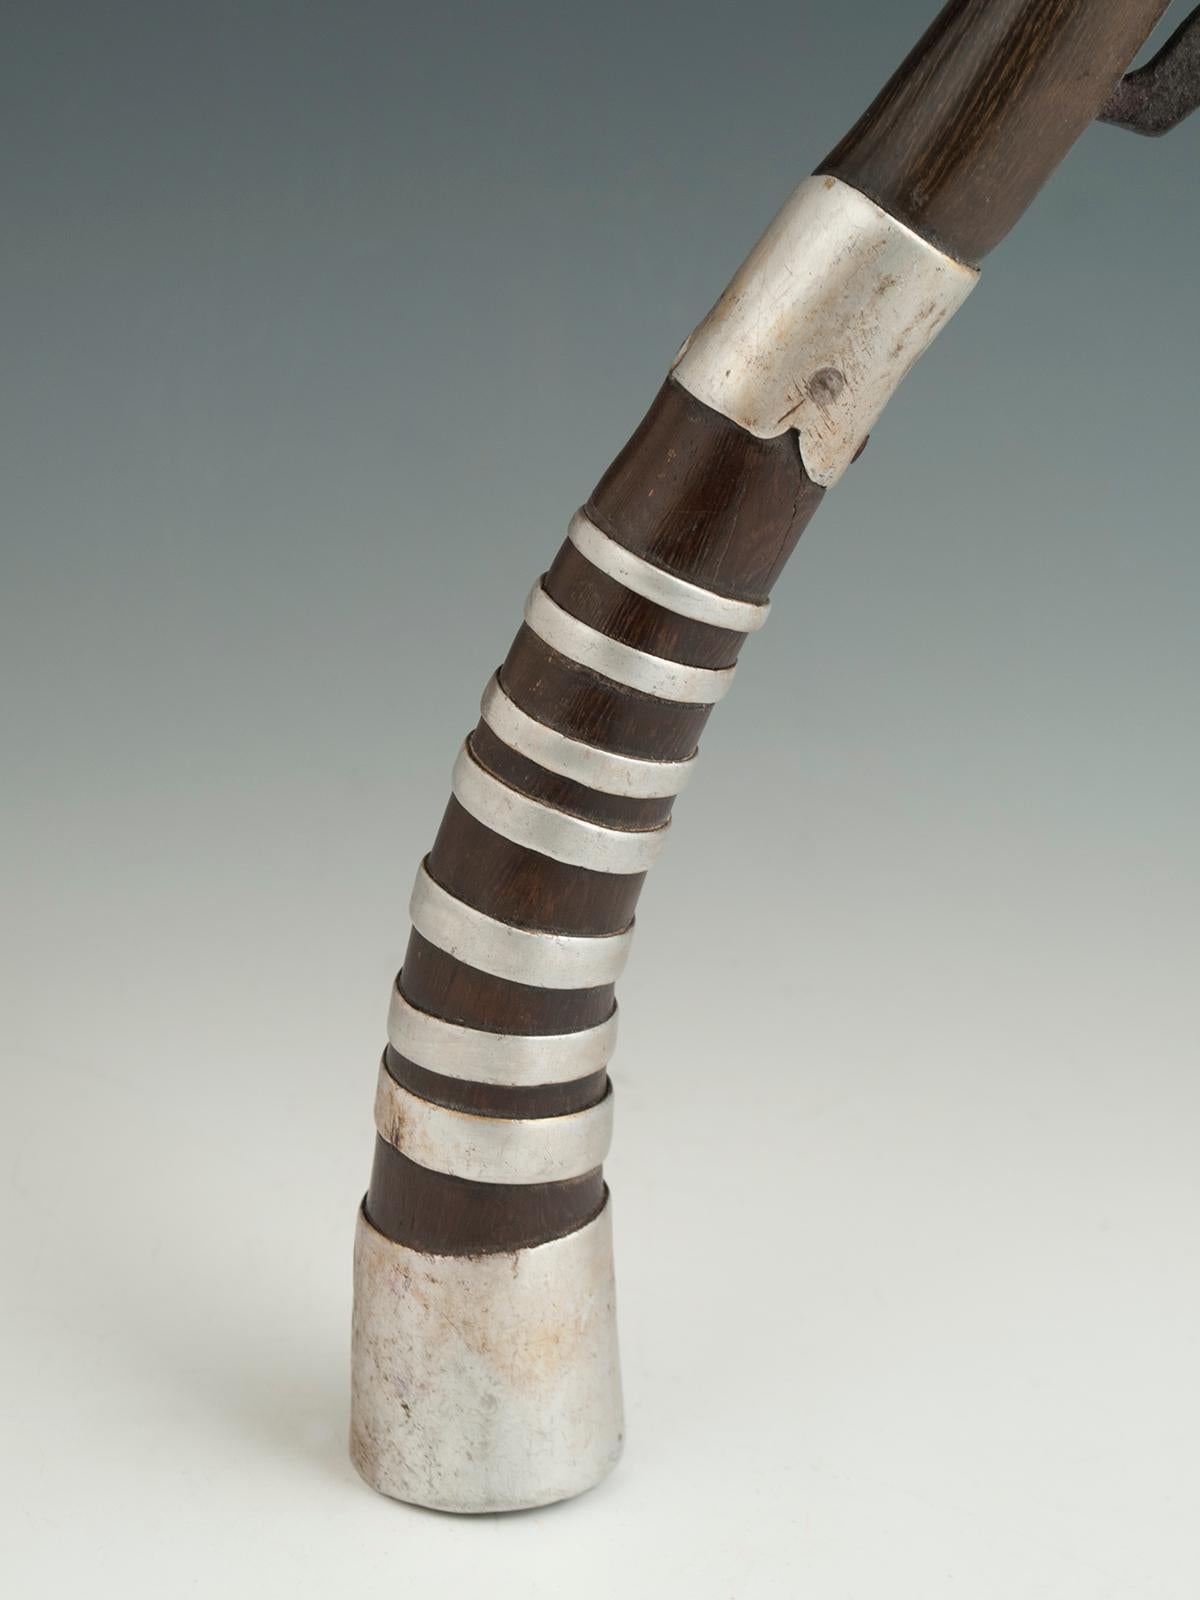 Southeast Asian Early to Mid-20th Century Tribal Horn Rice Cutter, Khymer Culture, Cambodia